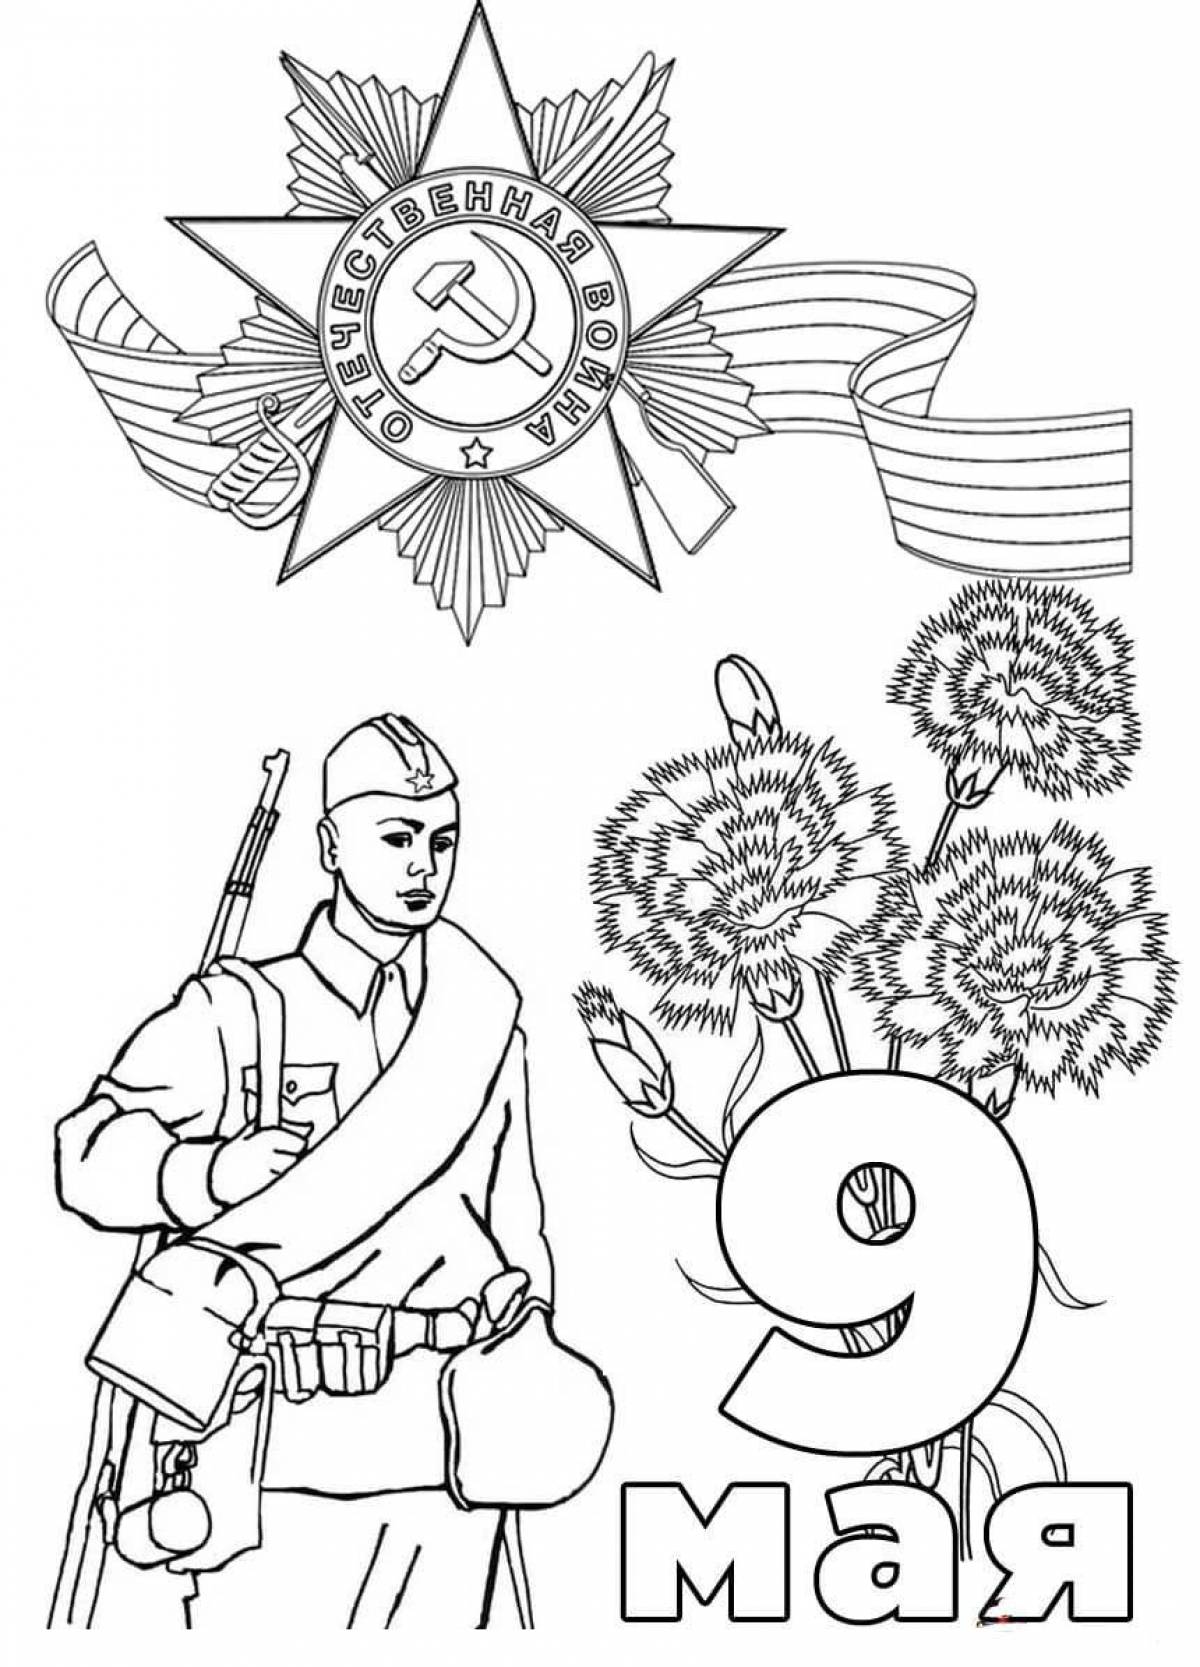 Victory day triumphal coloring page